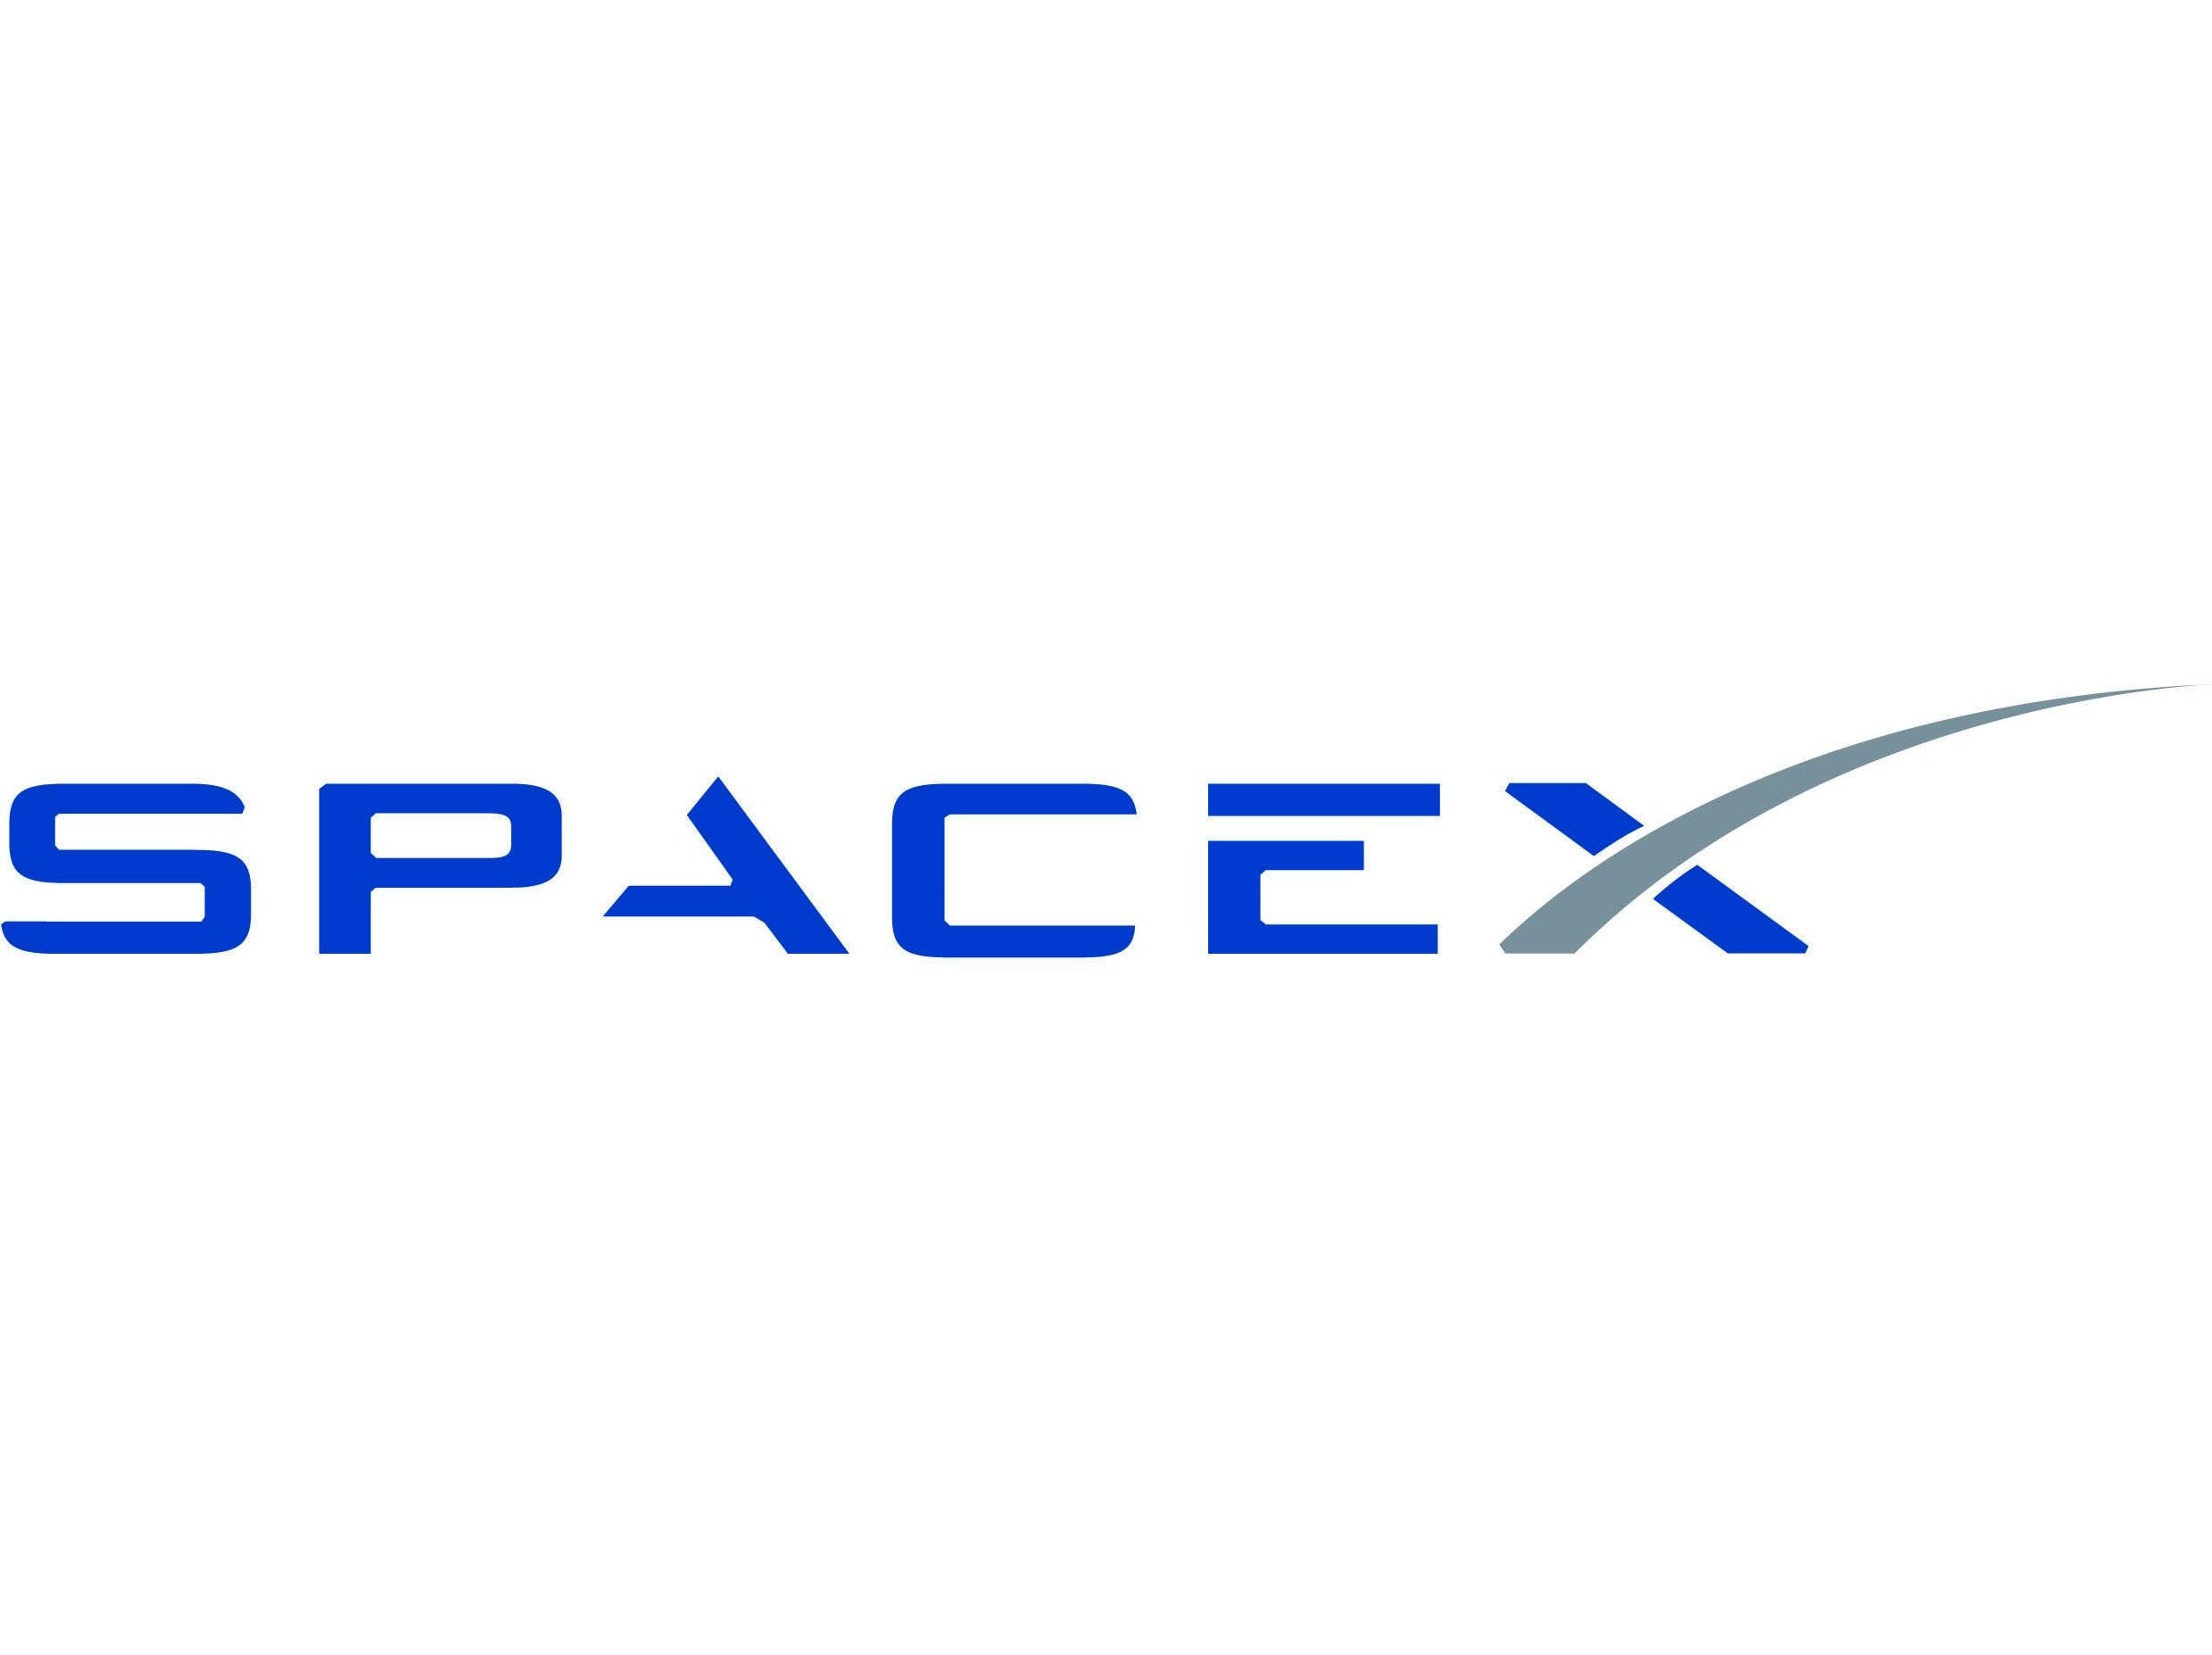 SpaceX Falcon 9 Logo - Companies To Watch